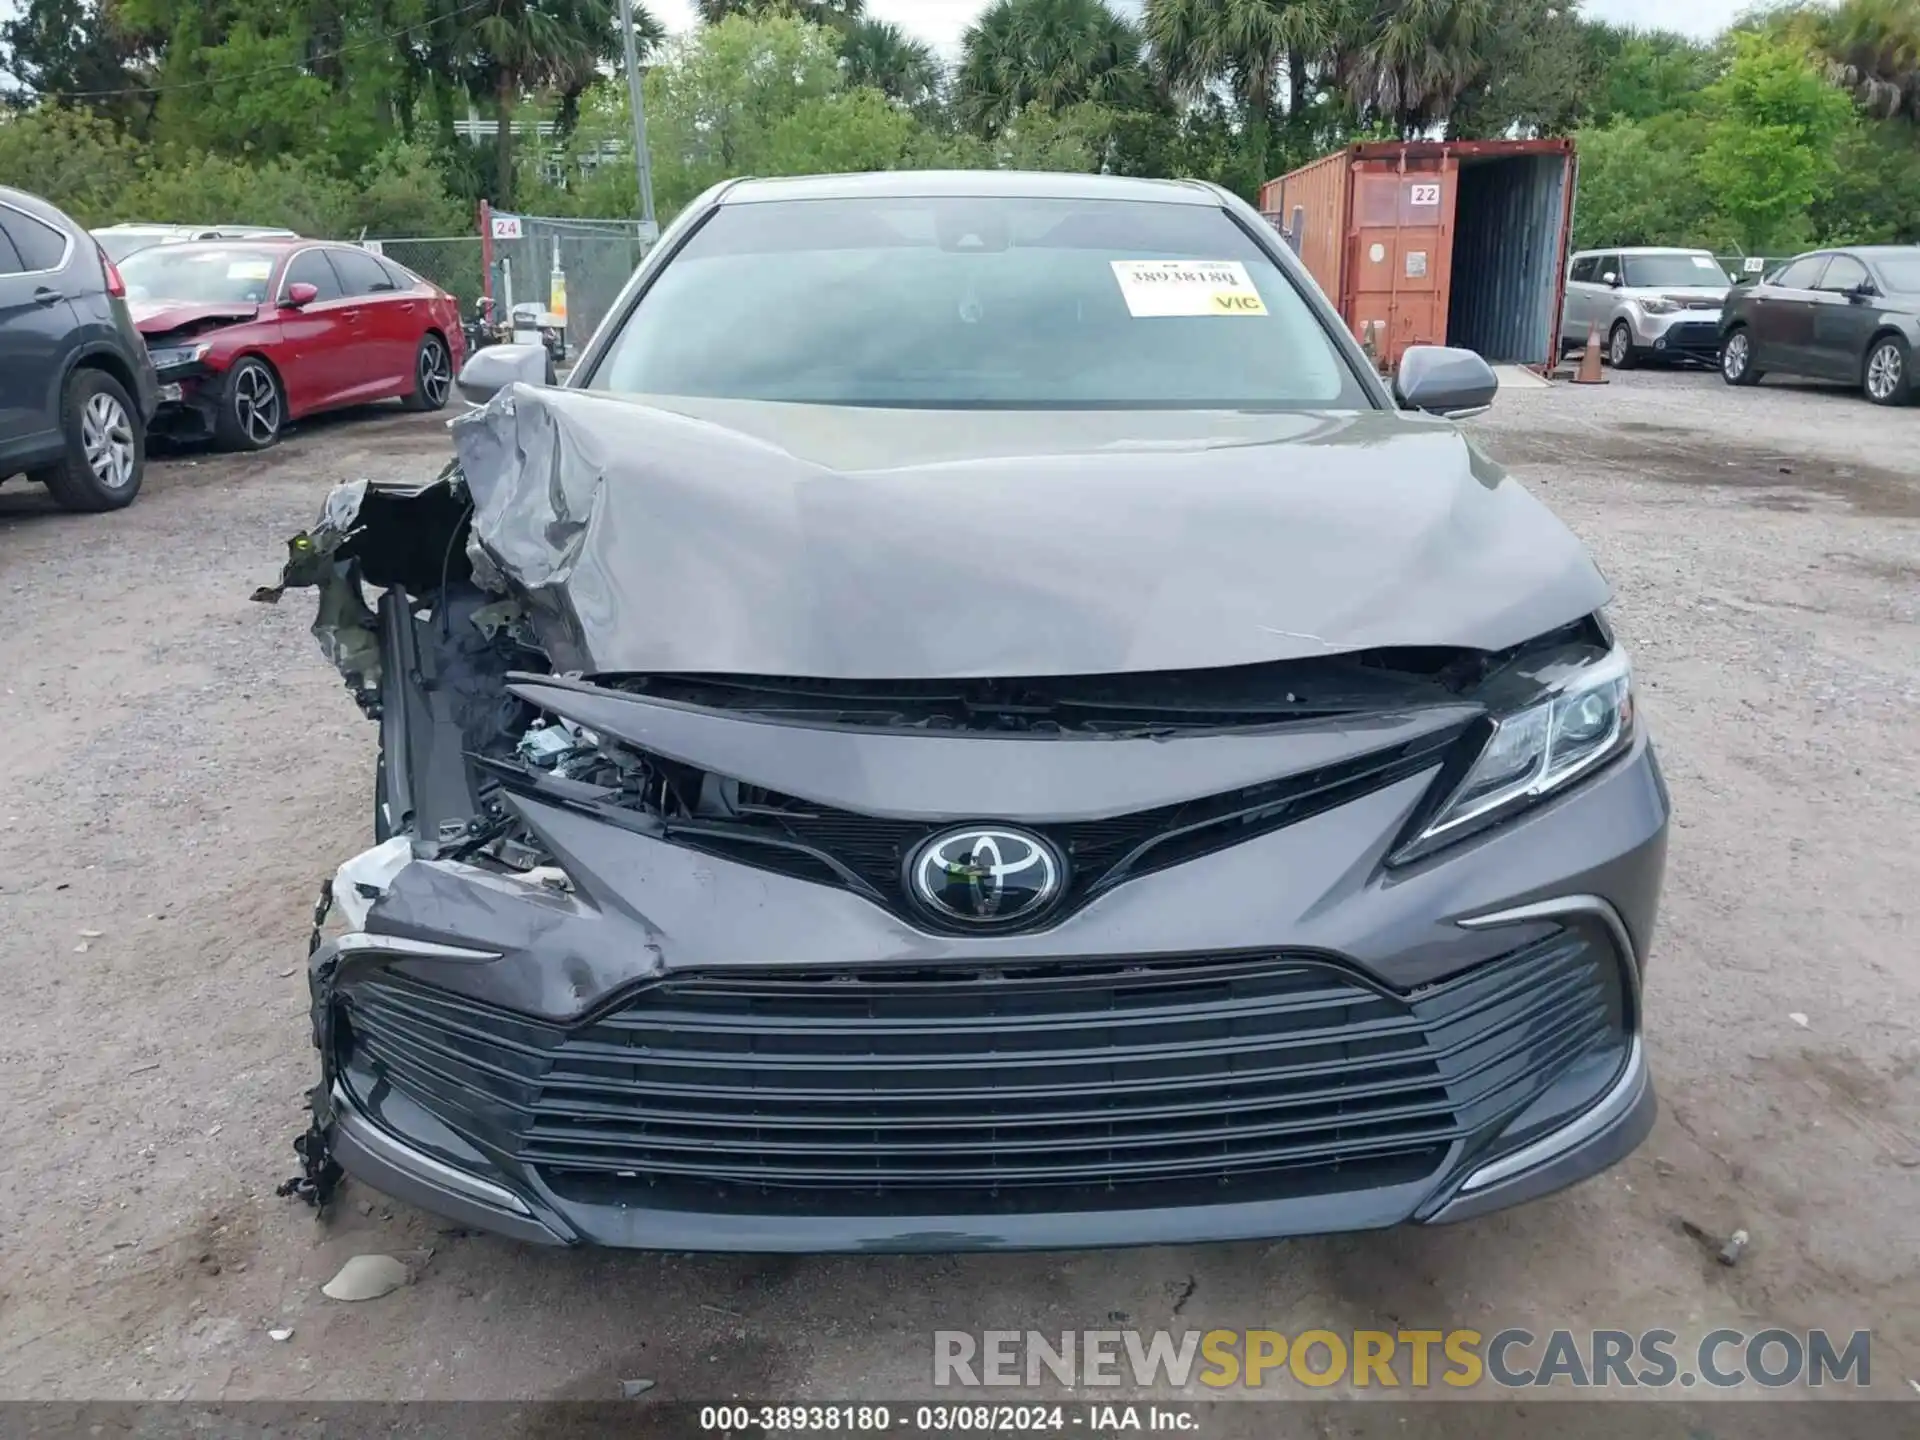 12 Photograph of a damaged car 4T1R11AKXNU671925 TOYOTA CAMRY 2022